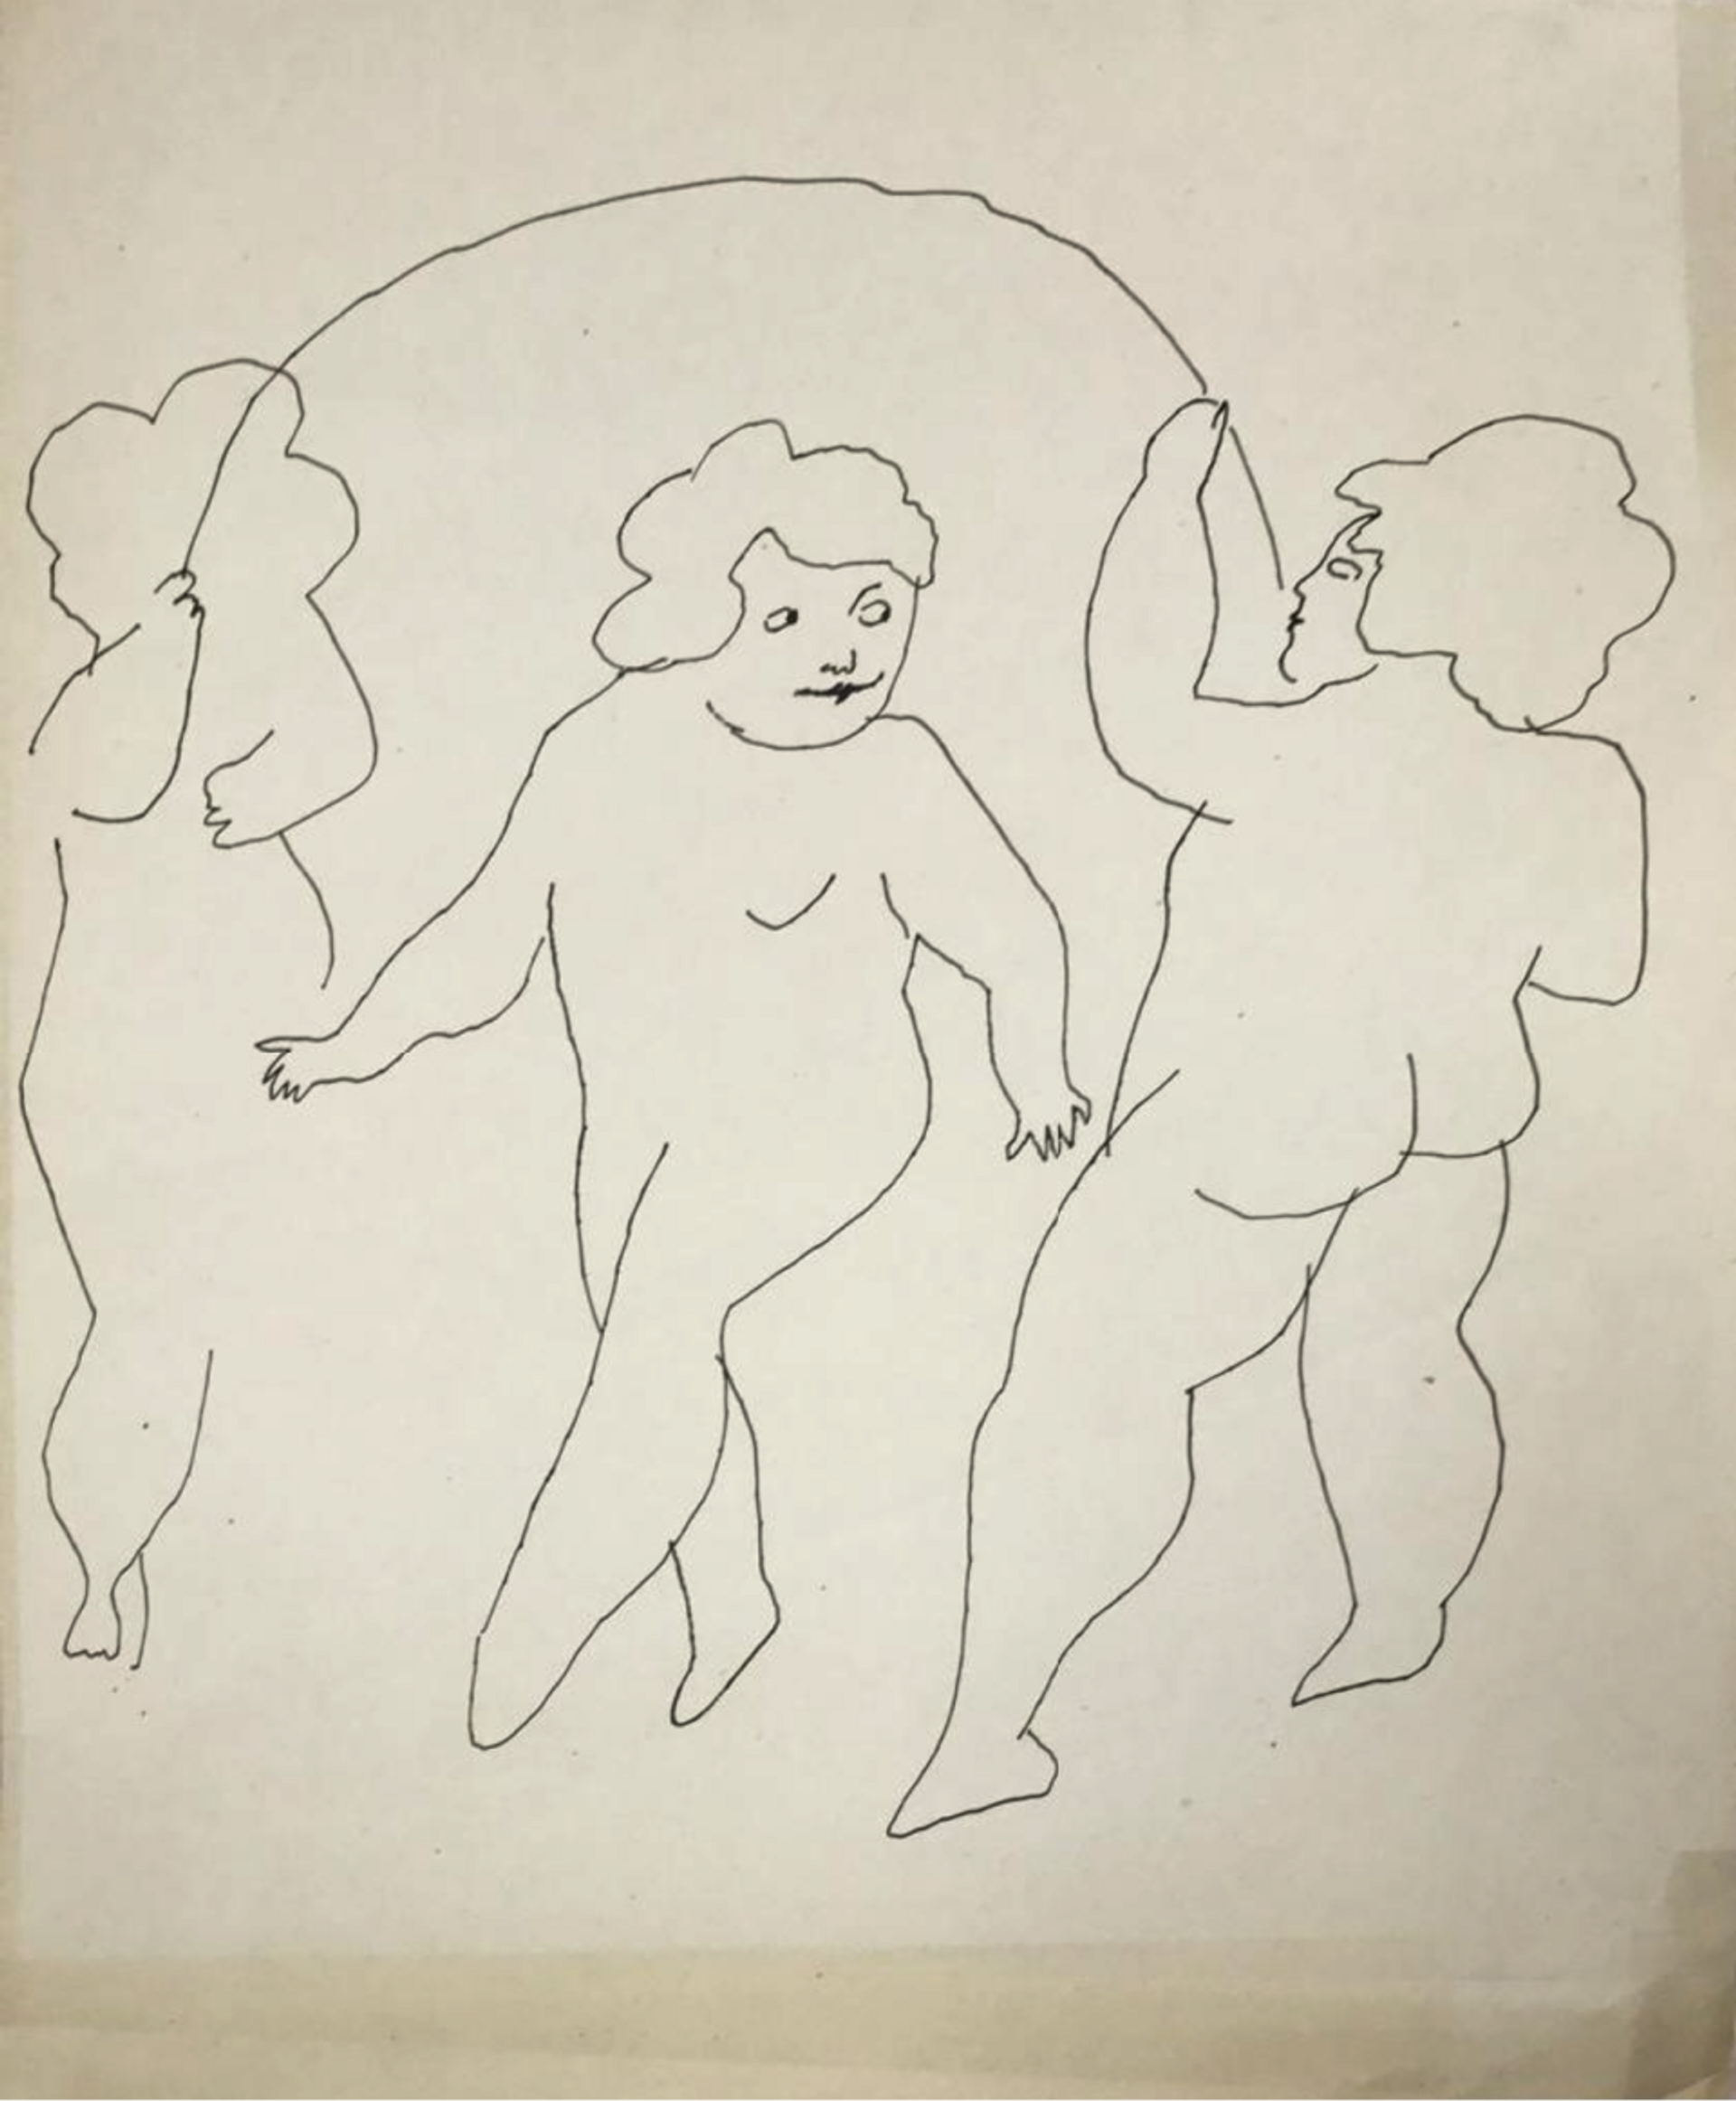 Possibly Andy Warhol's Faries (1954), but most likely Possibly Real Copy Of 'Fairies' by Andy Warhol By Mschf (2021) Courtesy of the MSCHF website